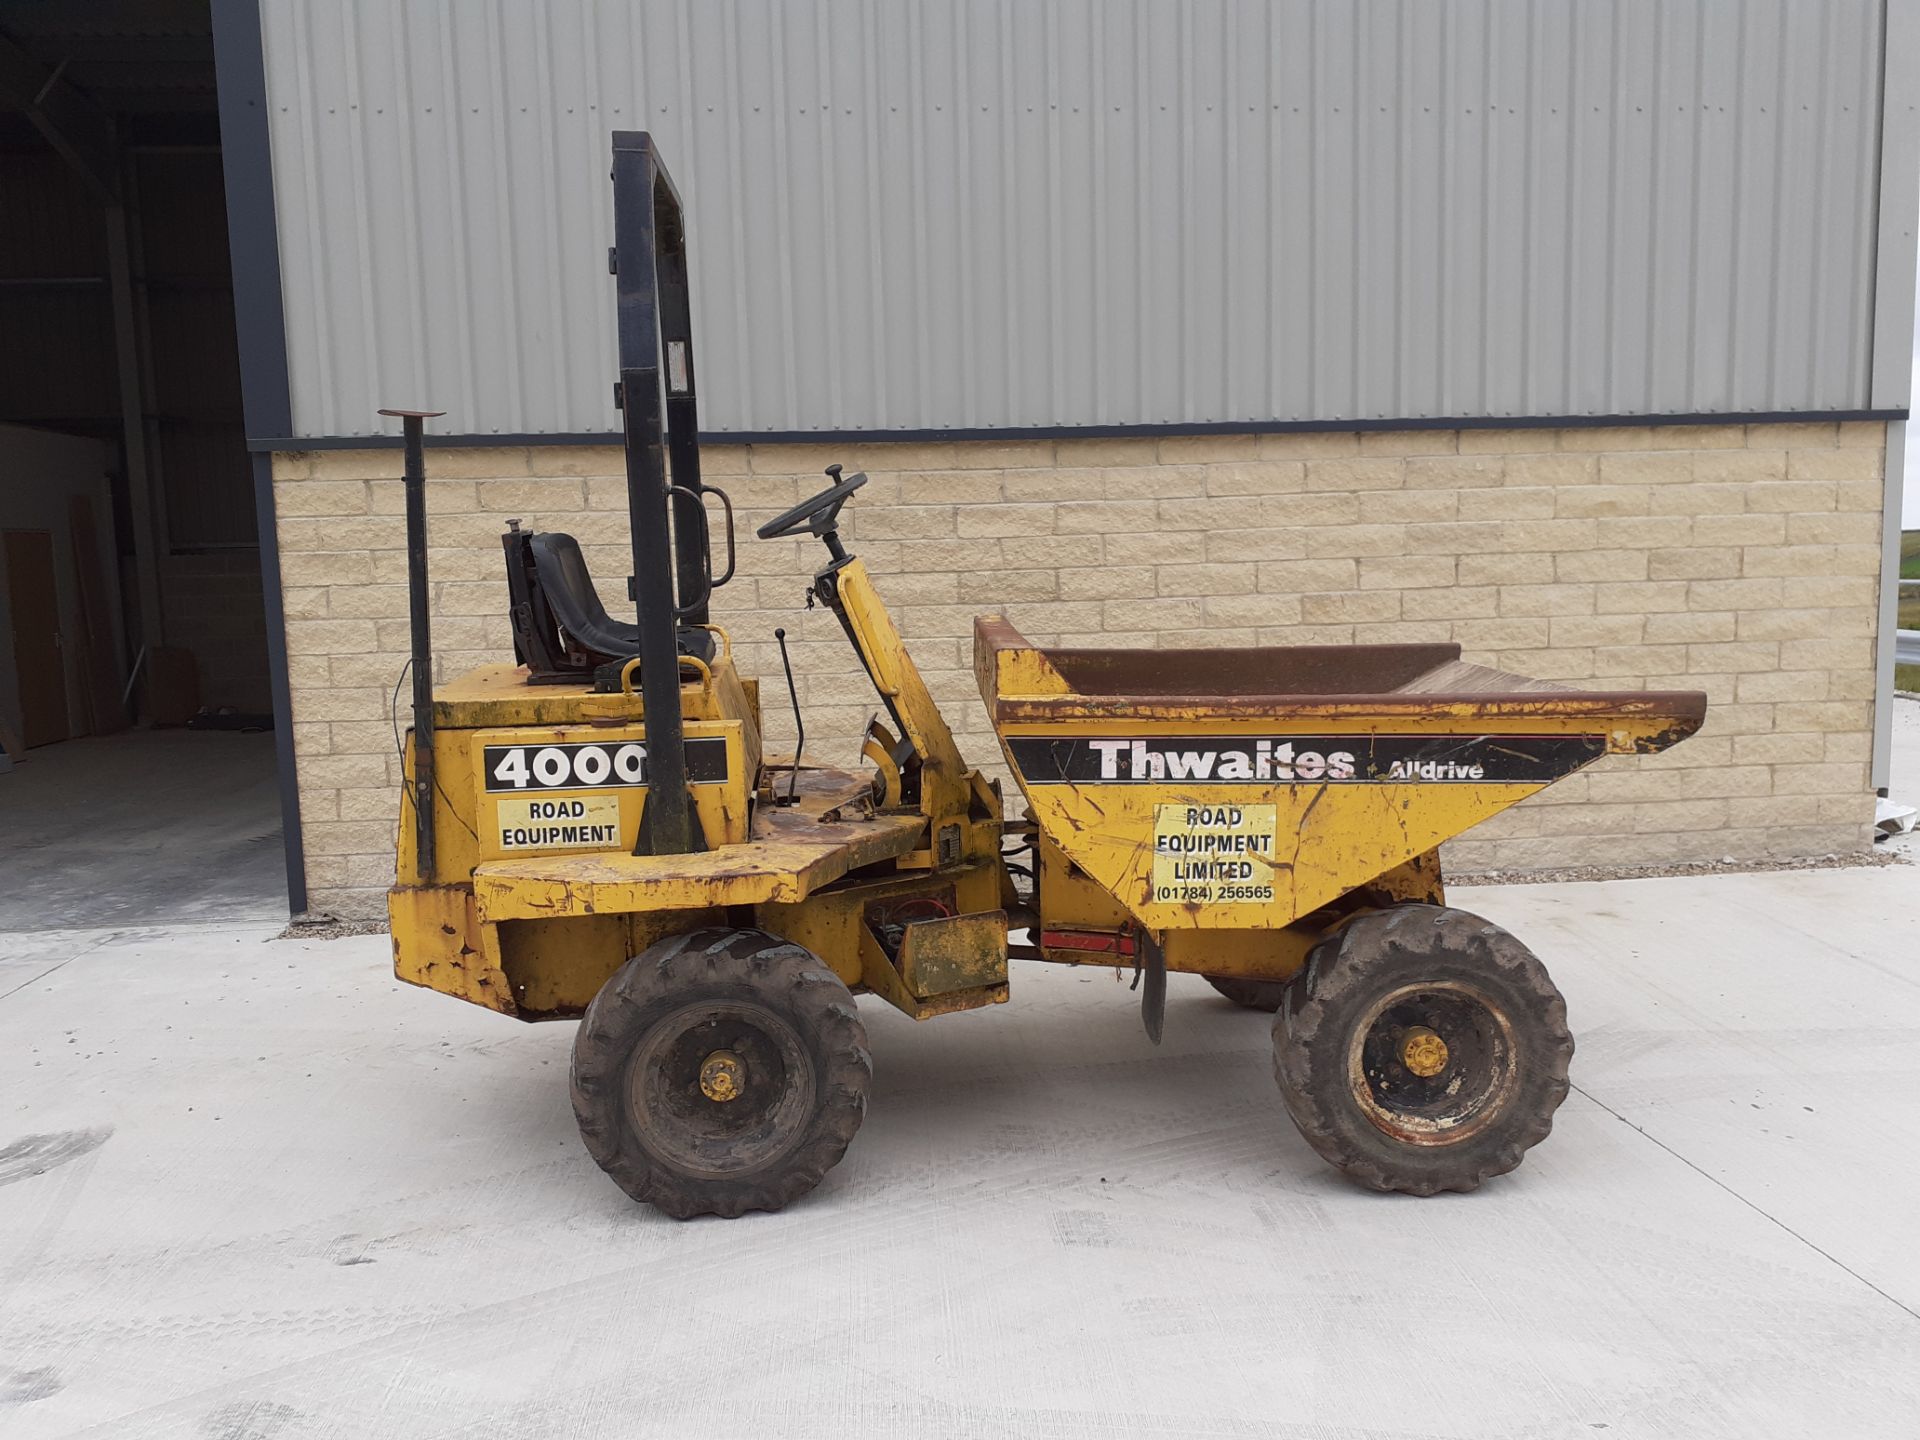 THWAITES 2 TONNE DUMPER, STARTS DRIVES TIPS, CHASSIS PLATE SHOWS 1998, WAS ROAD REGISTERED IN 2001